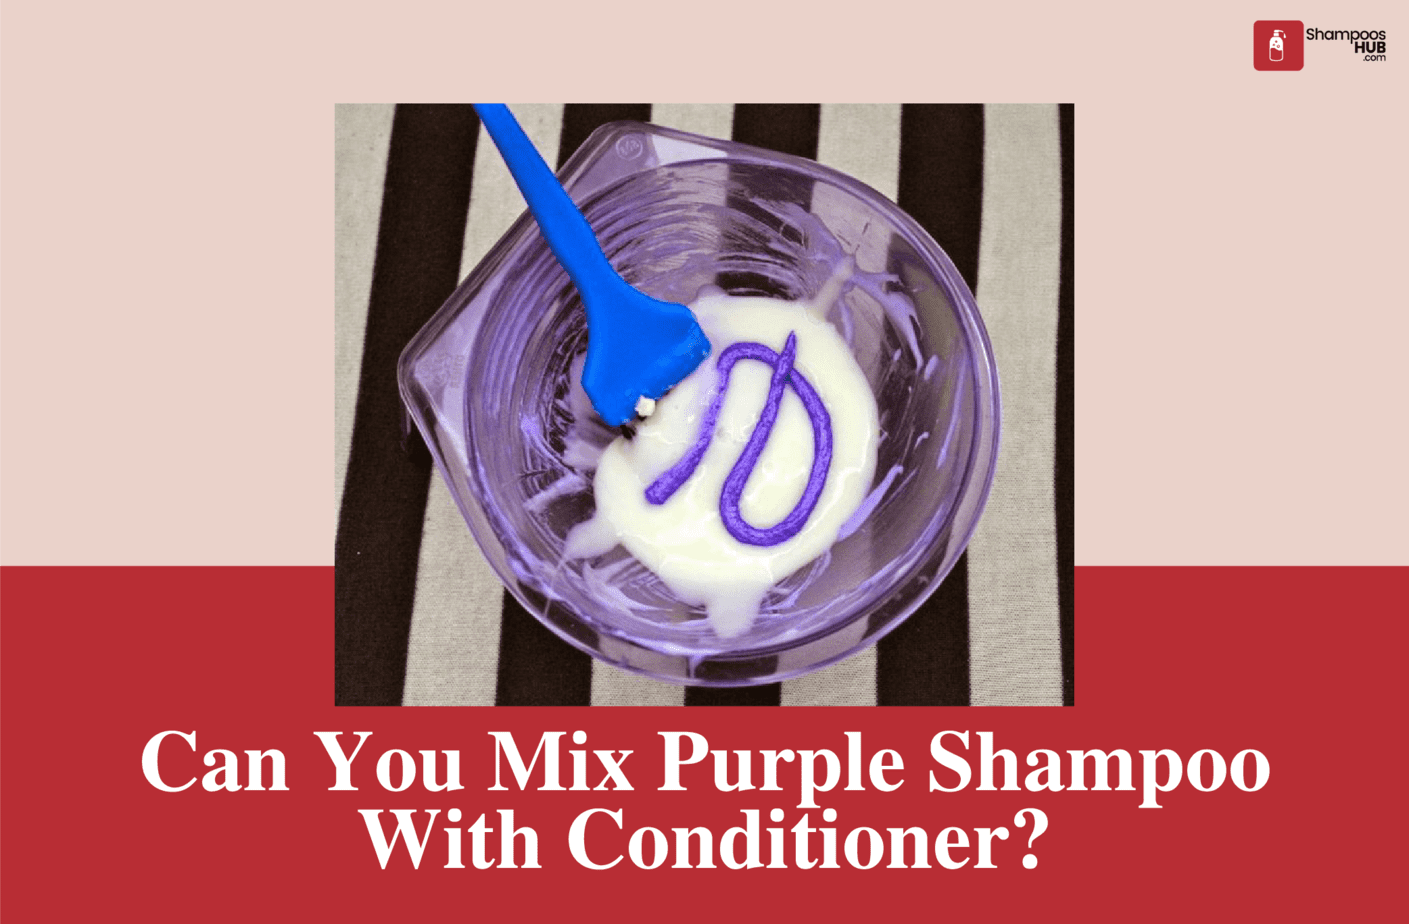 Can You Mix Purple Shampoo With Conditioner?